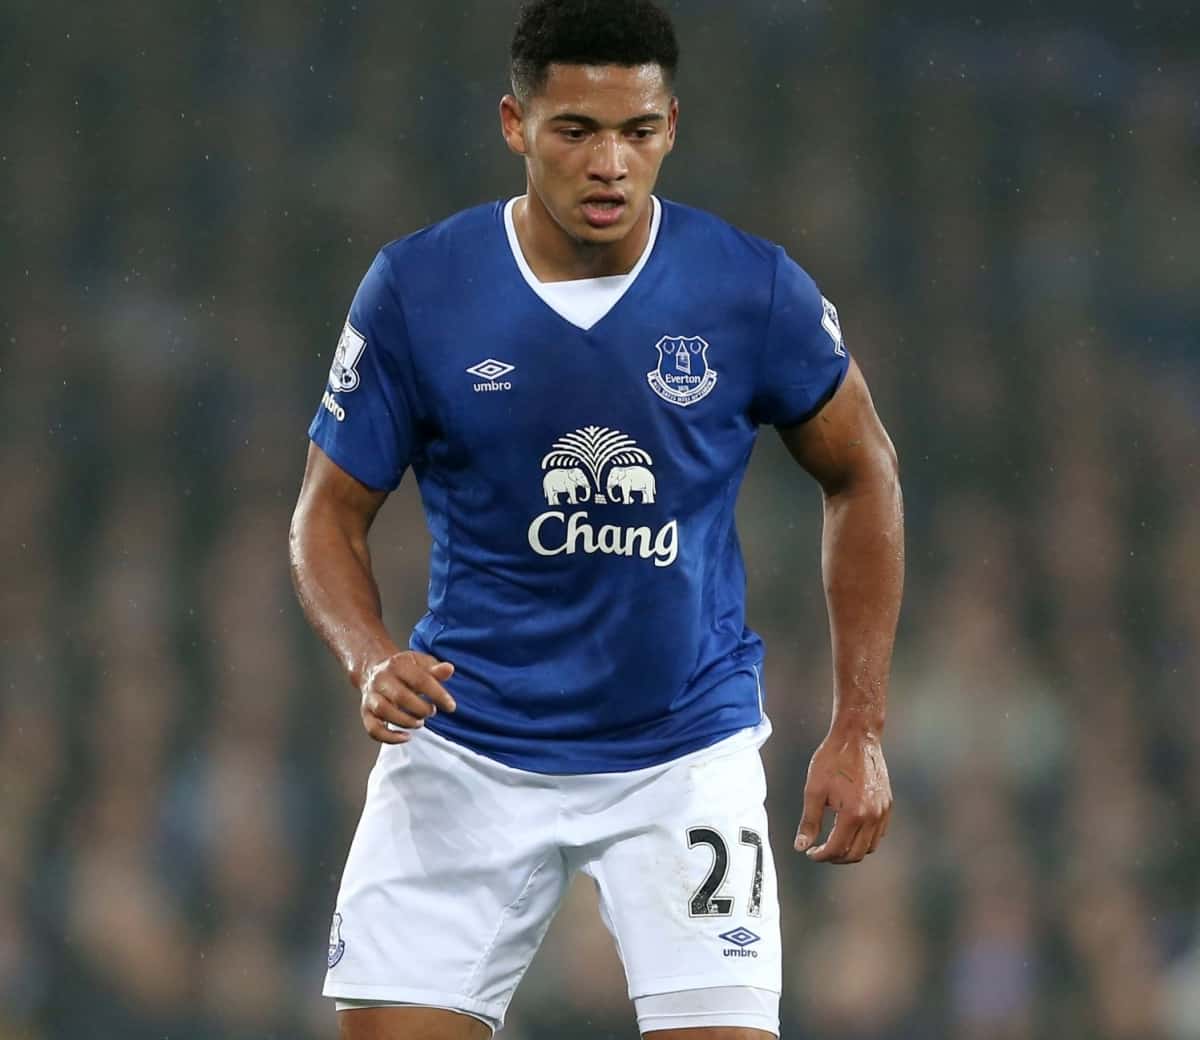 Long trip to China paying off for former Everton player